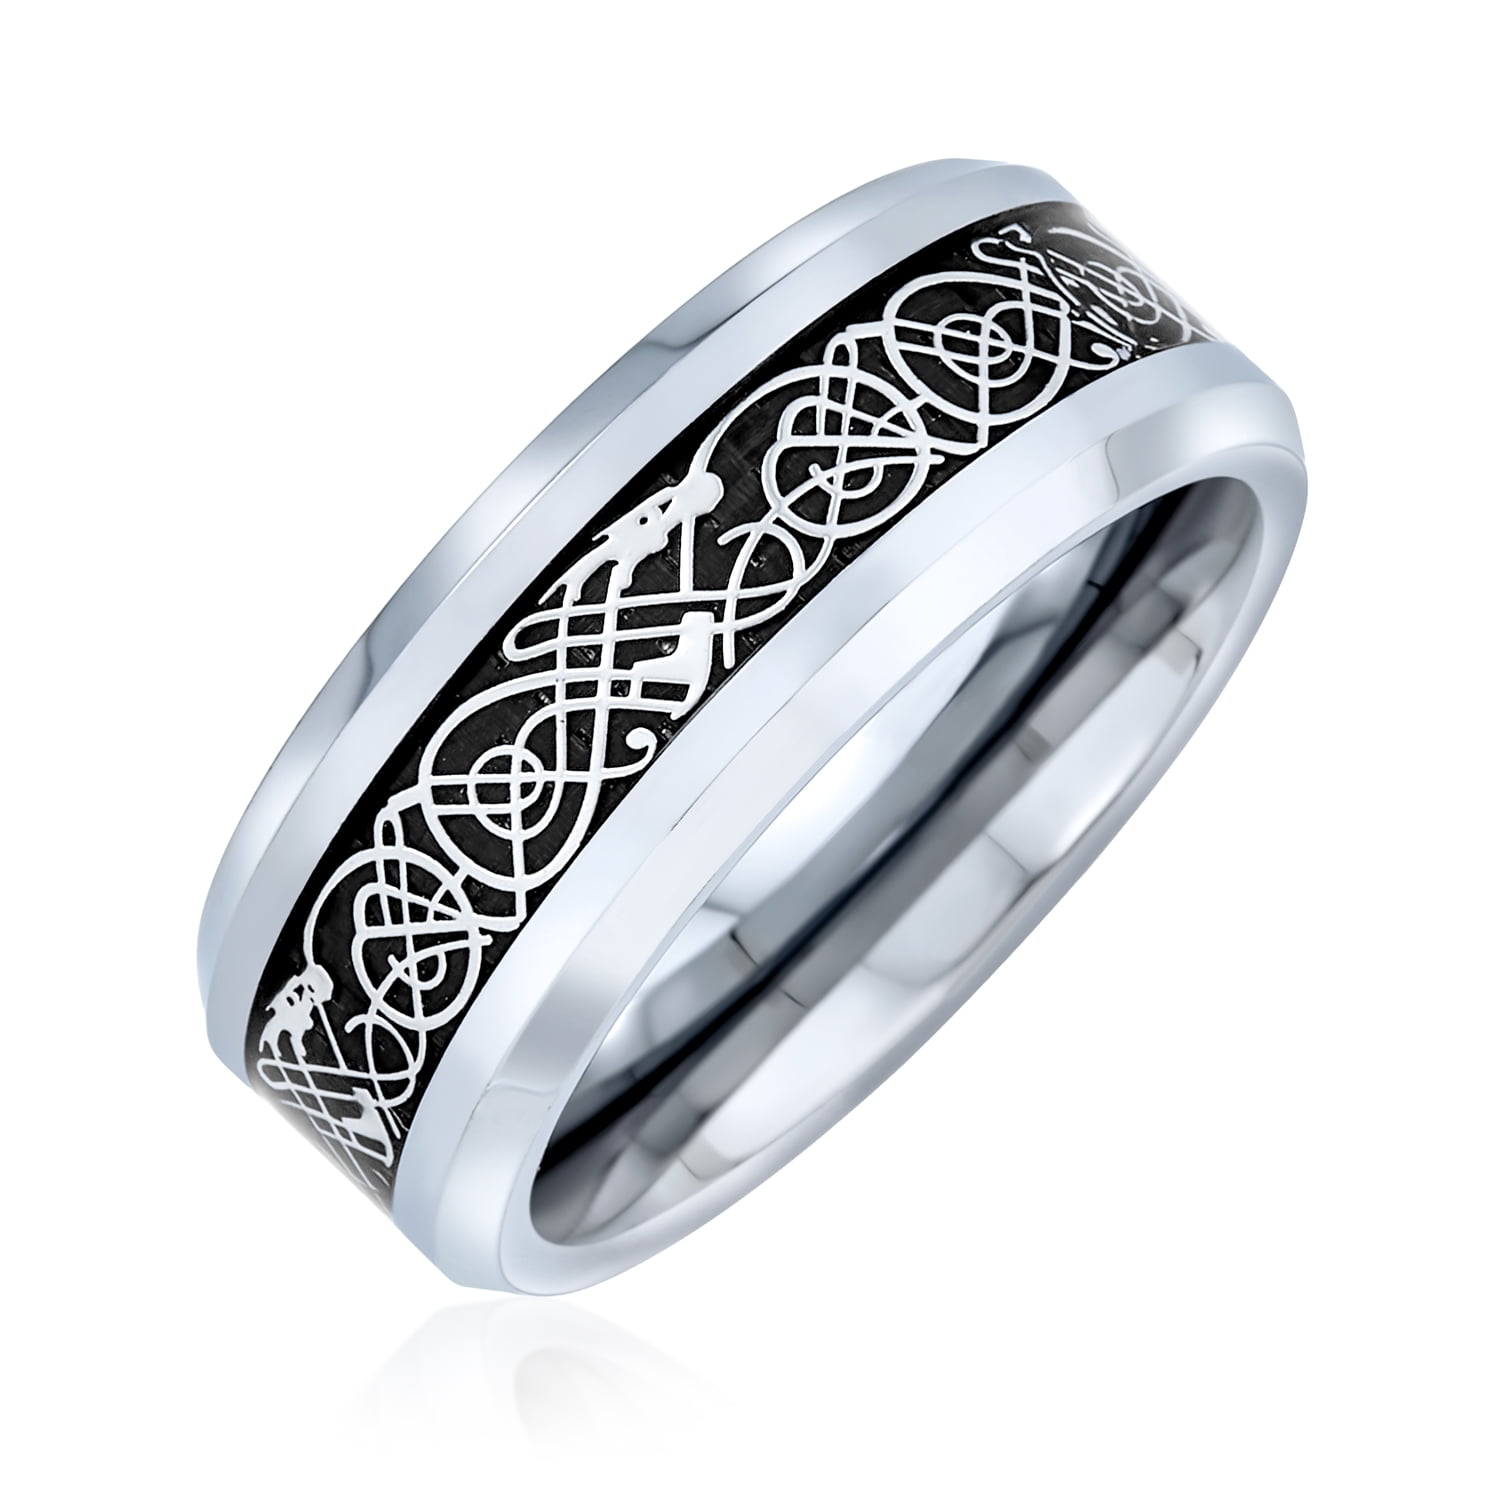 5/16" wide Sterling Silver Celtic Knot Flat Wedding Band Ring 8 mm 